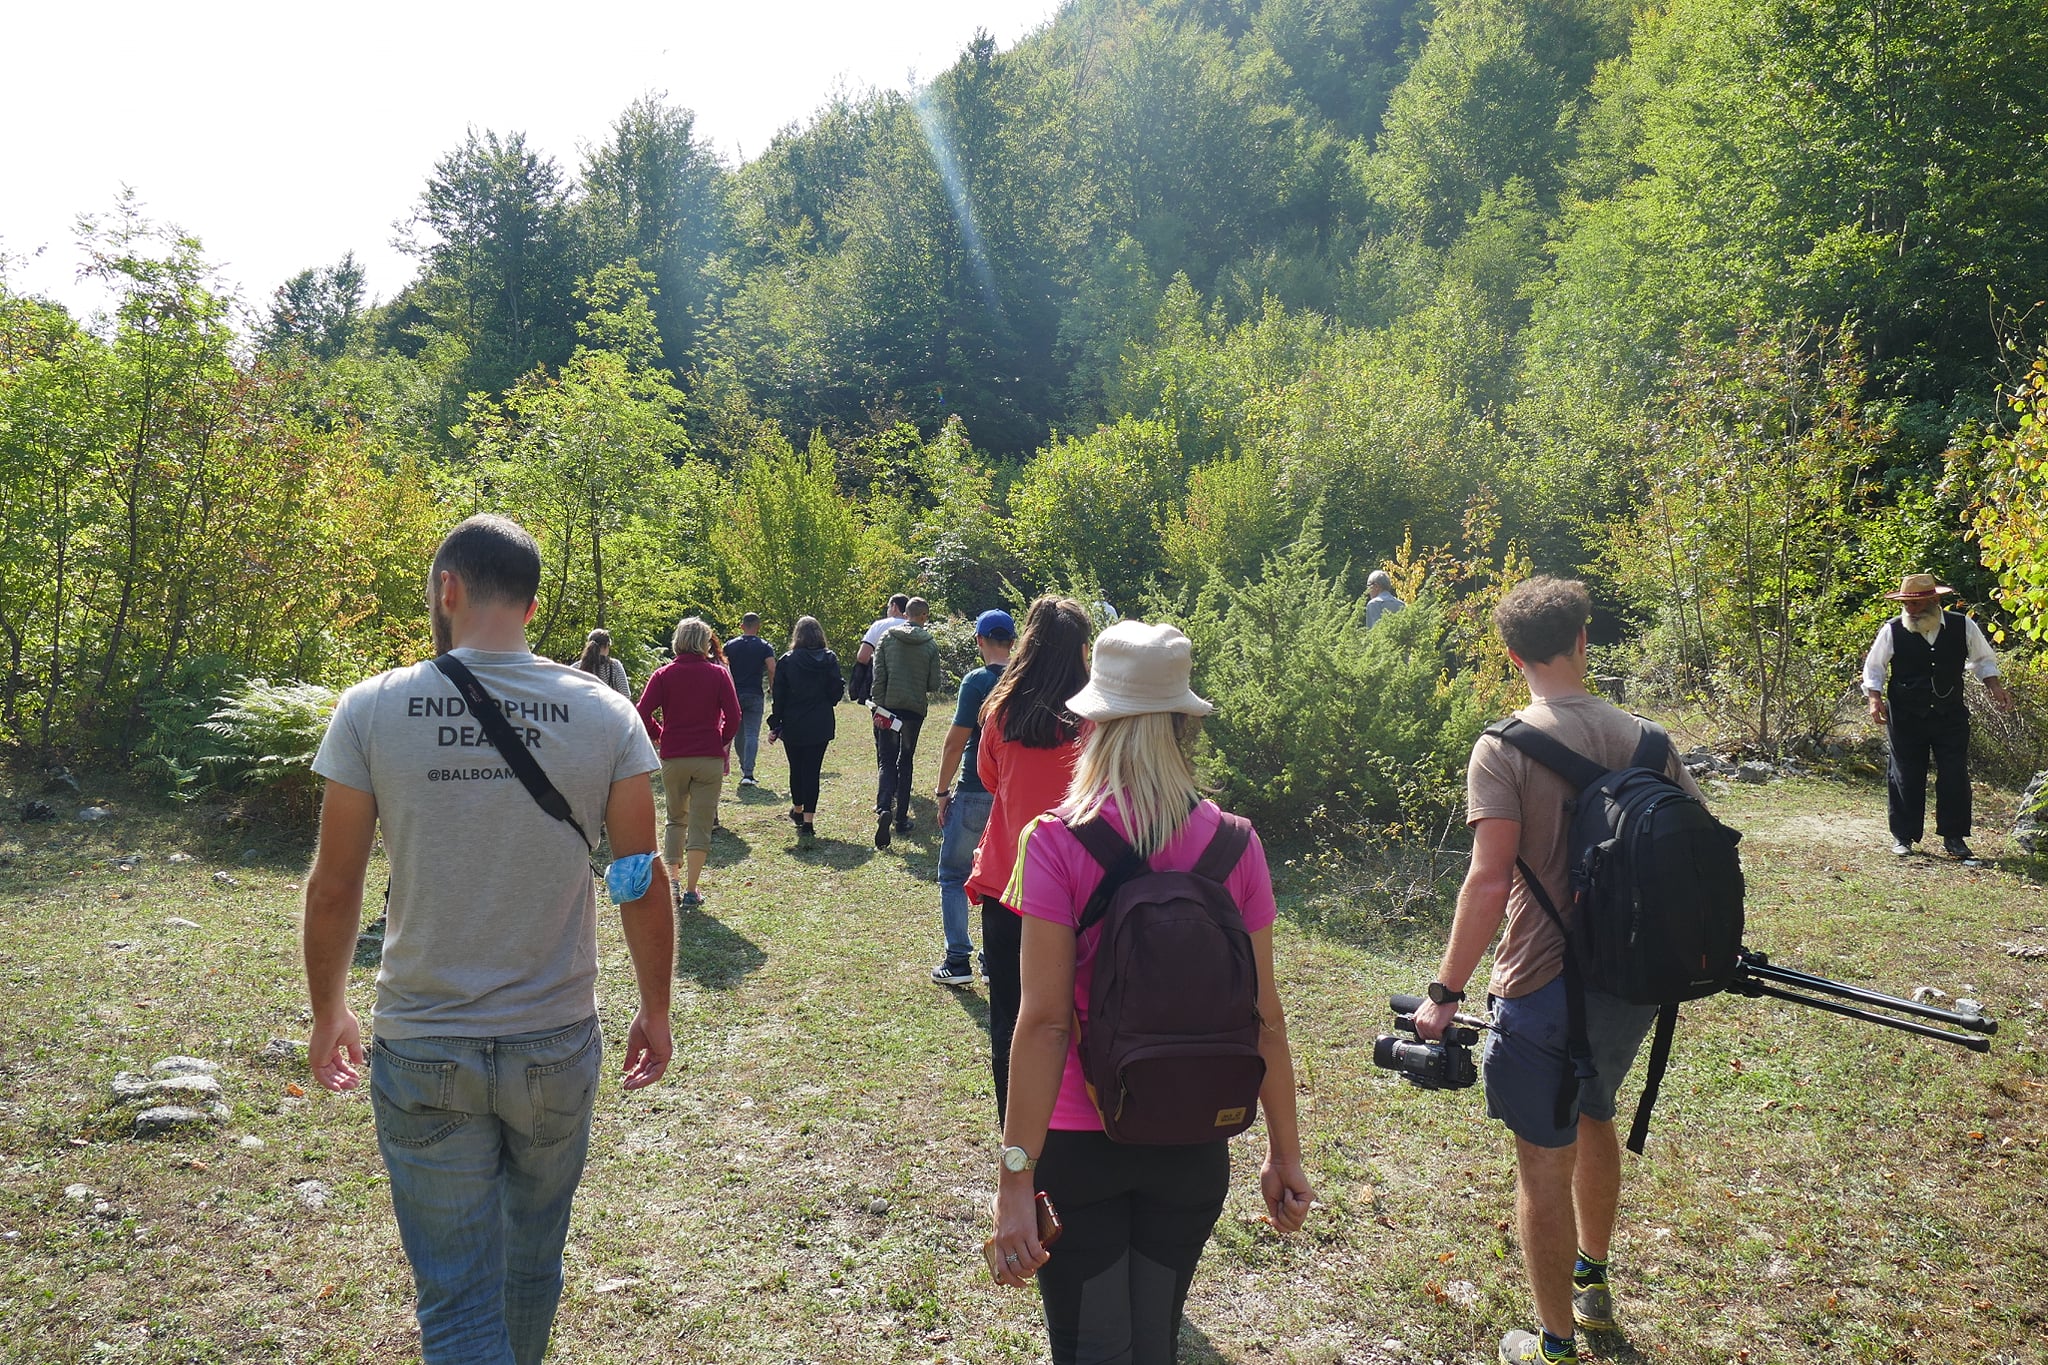 BioBlitz 2020, A NATIONAL GEOGRAPHIC INITIATIVE ORGANISED FOR THE FIRST TIME IN VALBONA RIVER, ALBANIA